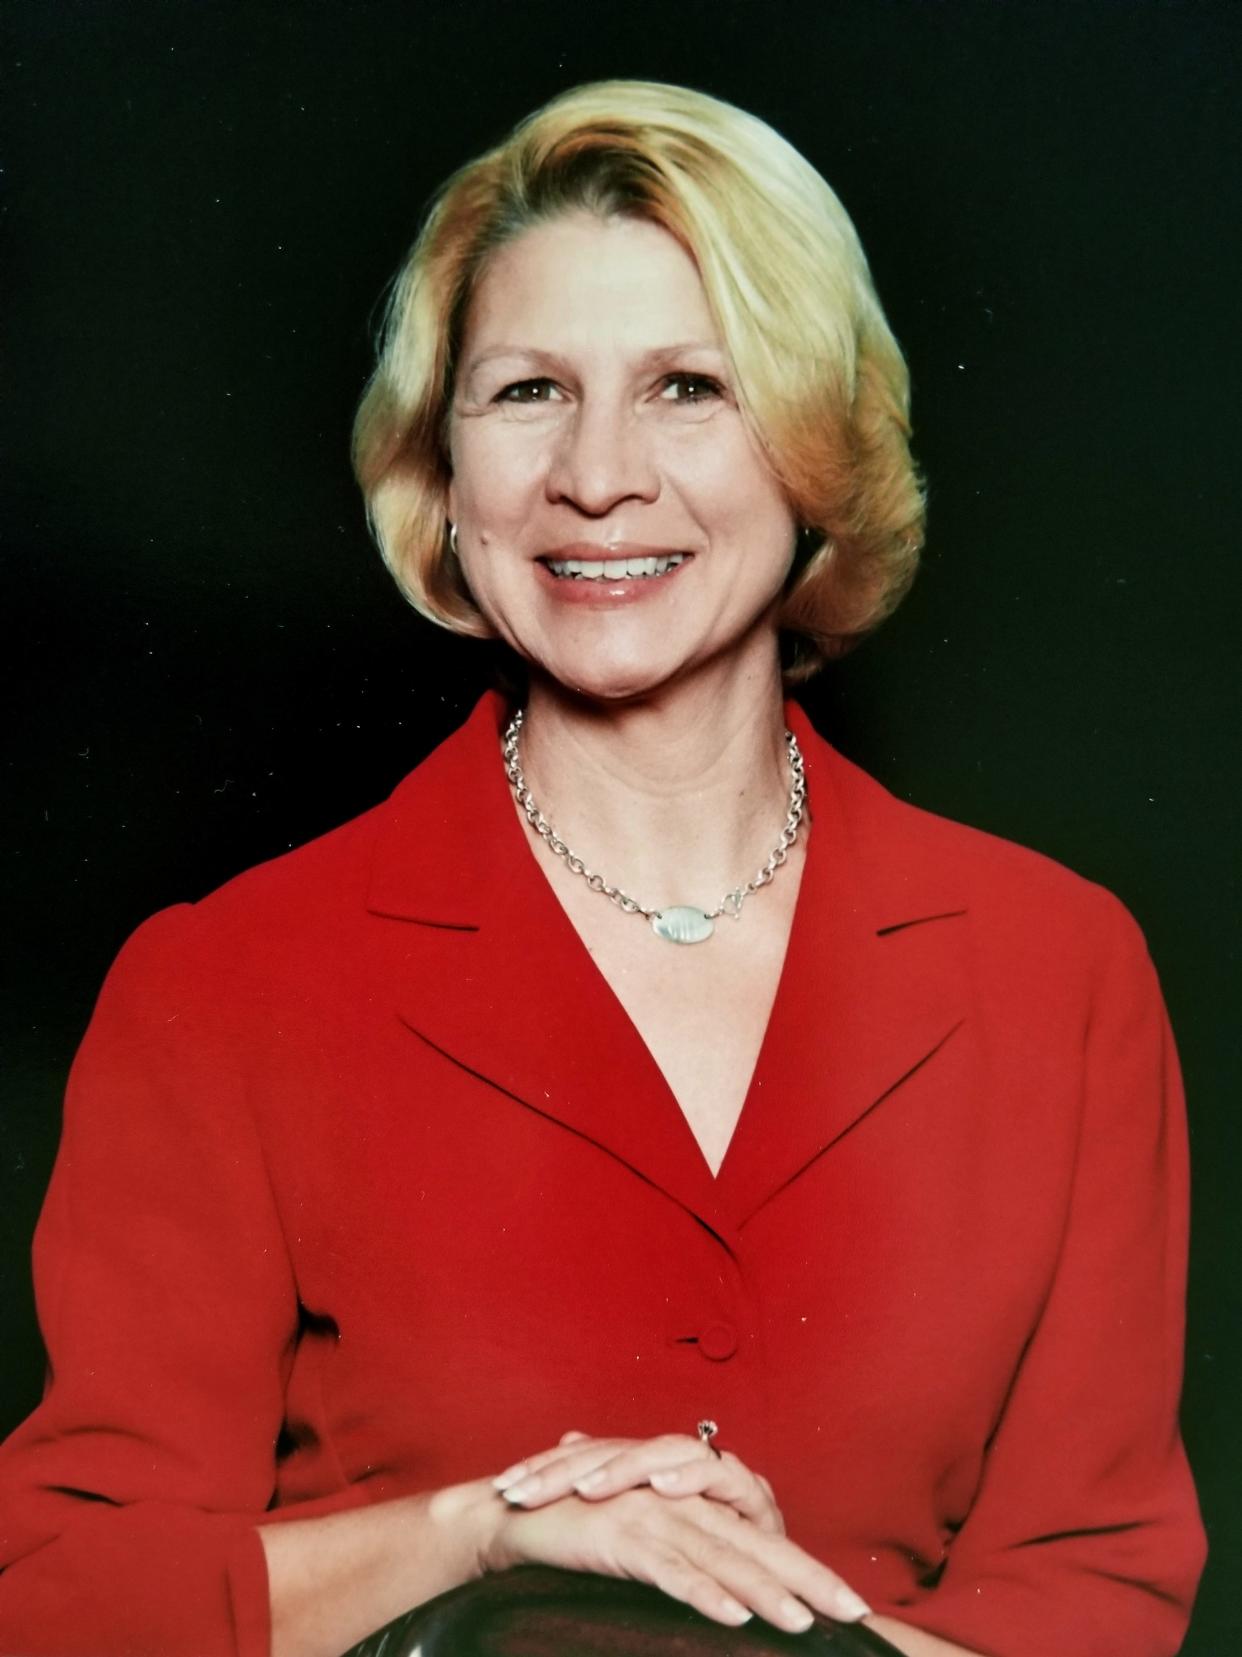 Cathy Hatch of Bartow, diagnosed with ALS in September 2020, recently died at age 64. She had been executive director of the Homeless Coalition of Polk County and later led the local chapter of the National Alliance of Mental Illness.